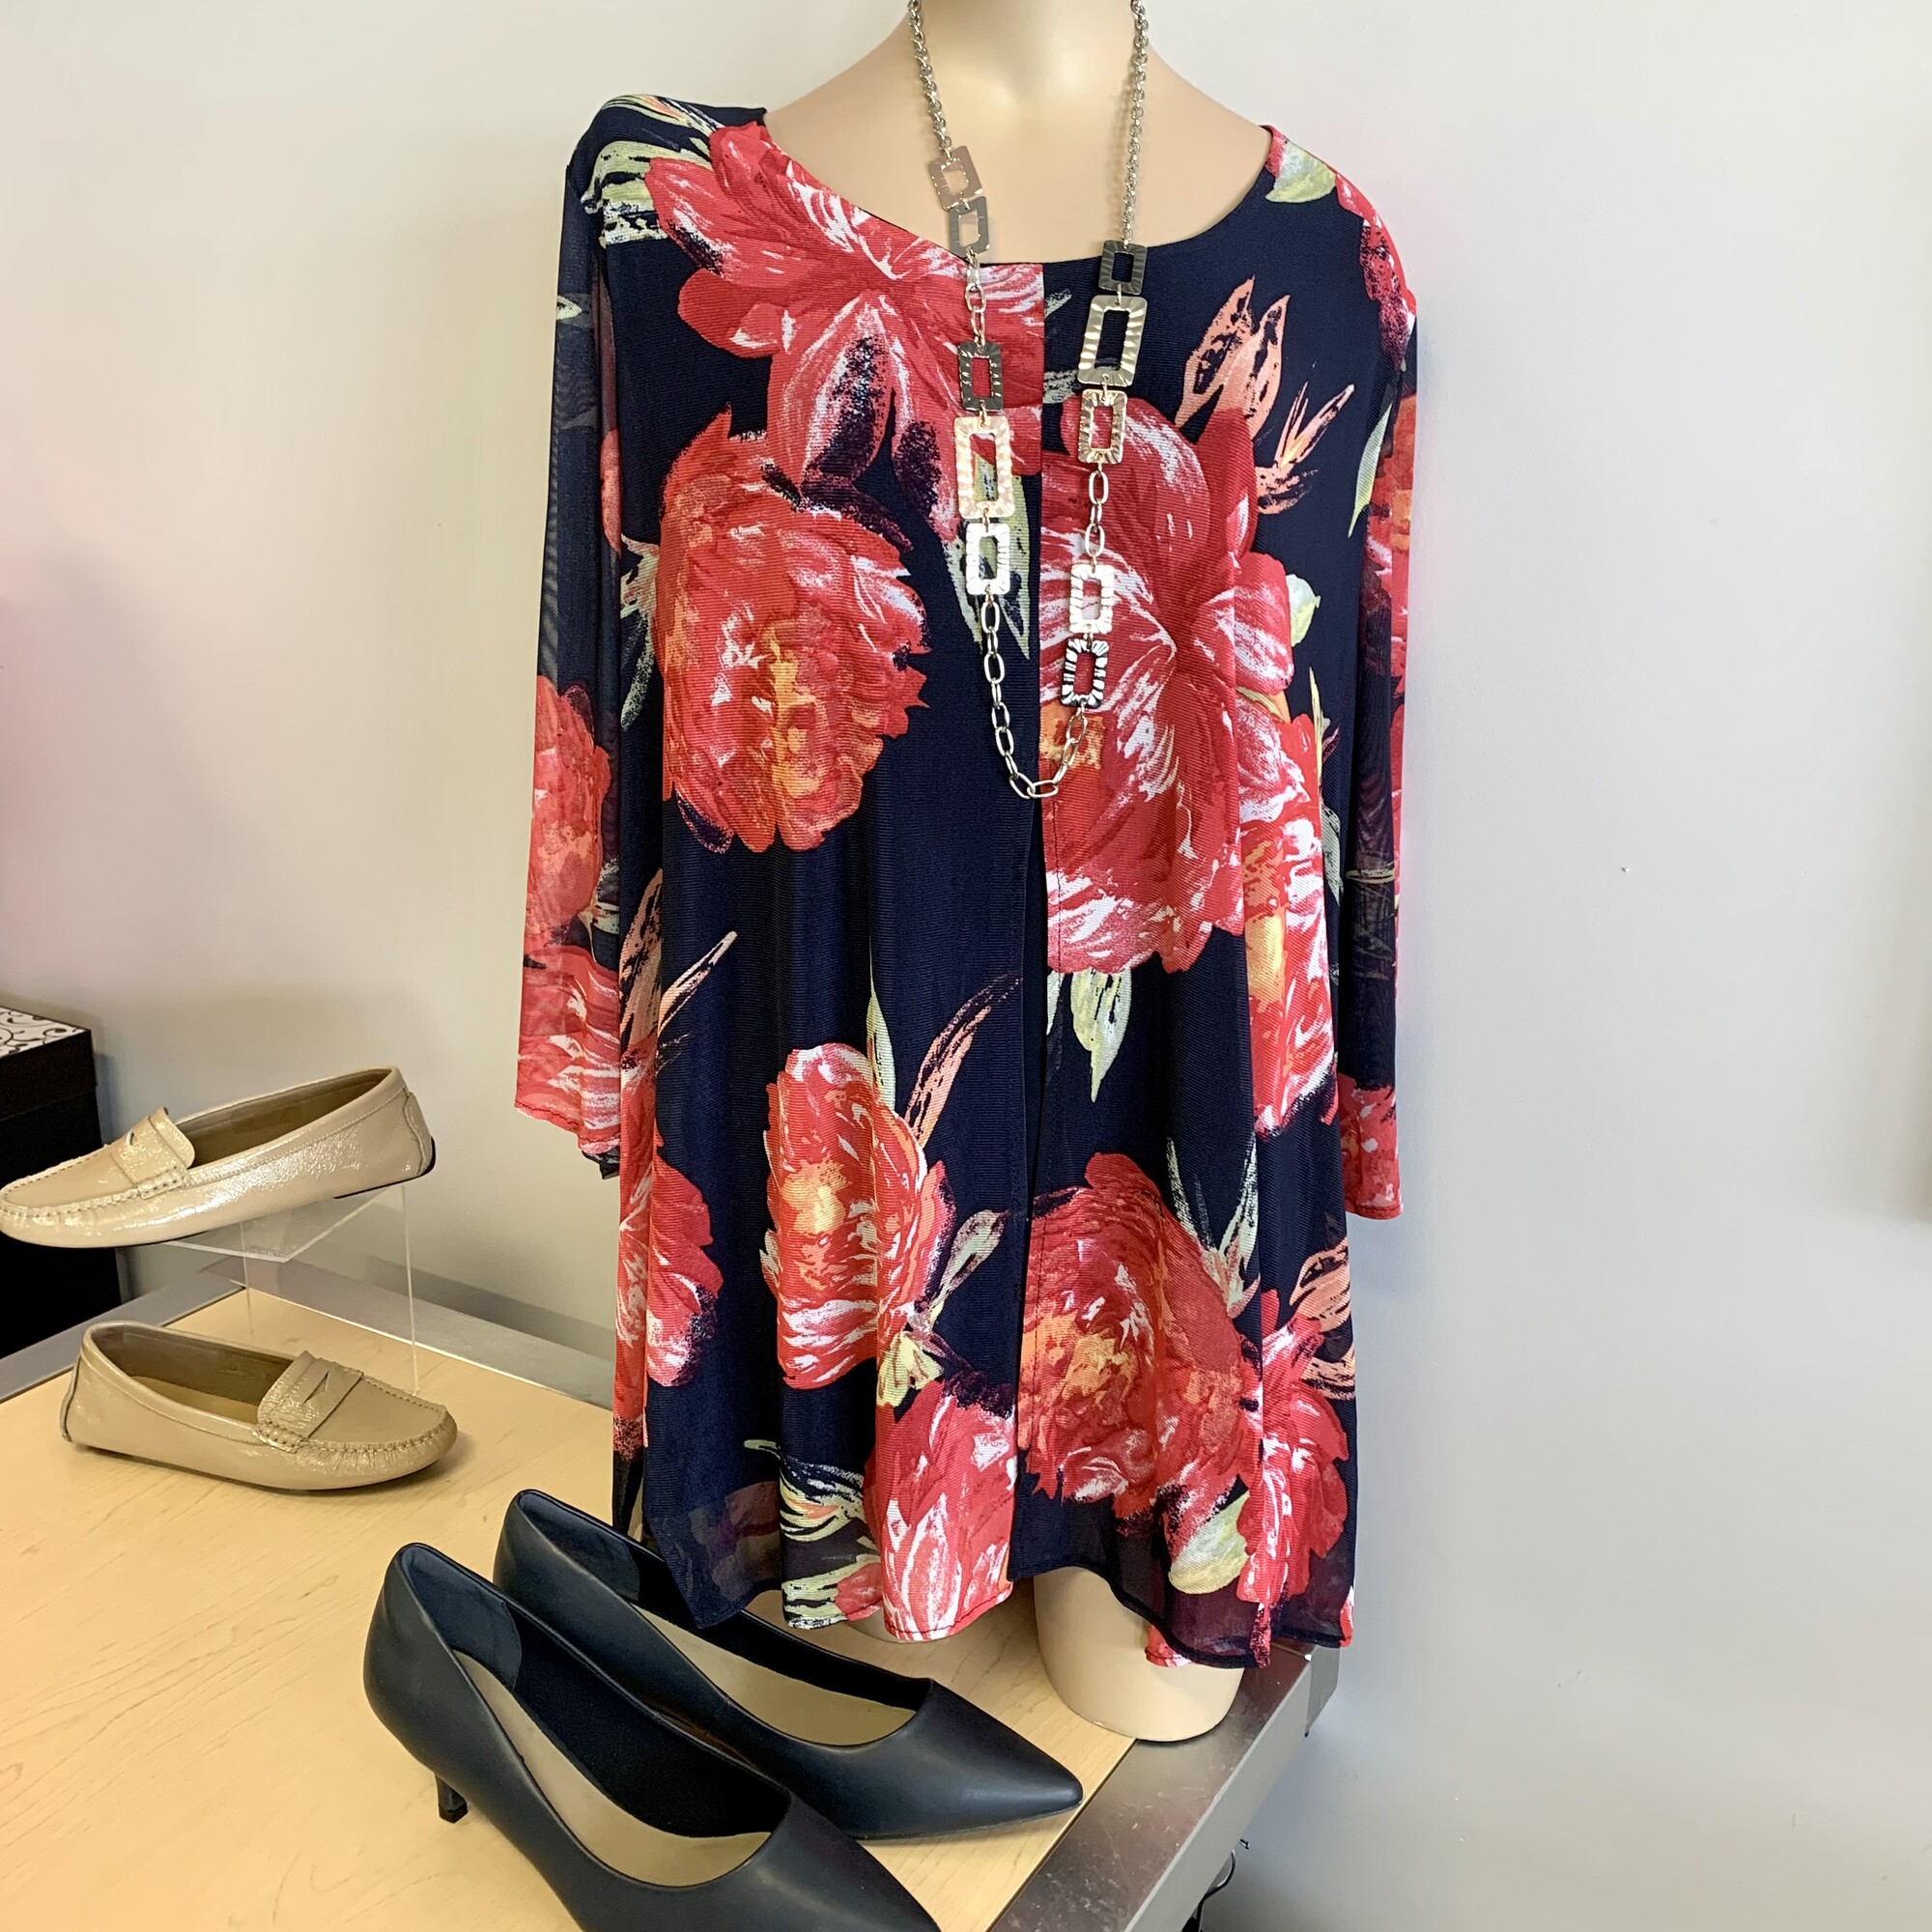 LAURA Top Layered,
Colour: Navy Red floral,
Size: XXXLarge,

Layered with splits in the top layer,
Sheer sleeves,